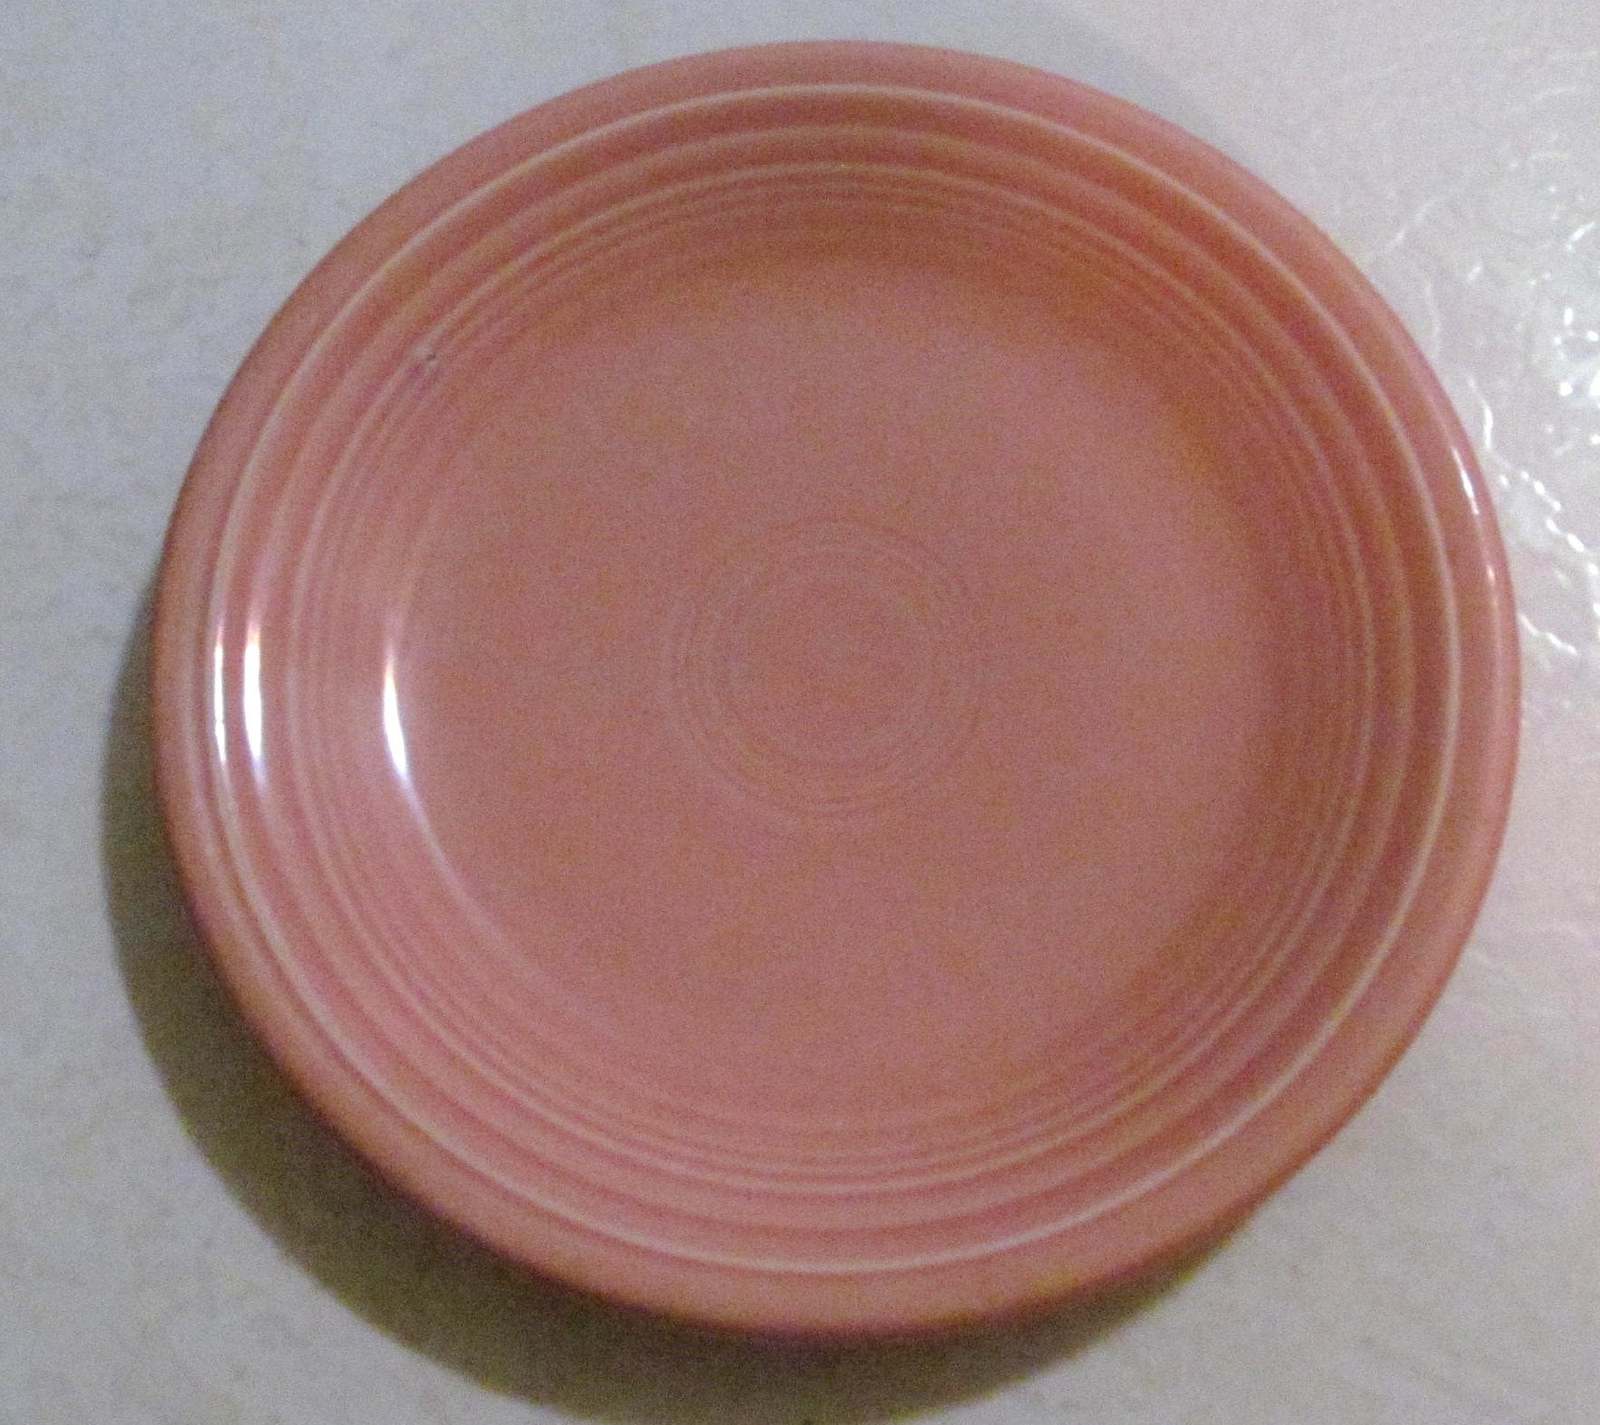 Primary image for Vintage Fiesta Rose Pink Color Solid Heavy Collectible Side Plate by Homer Laugh